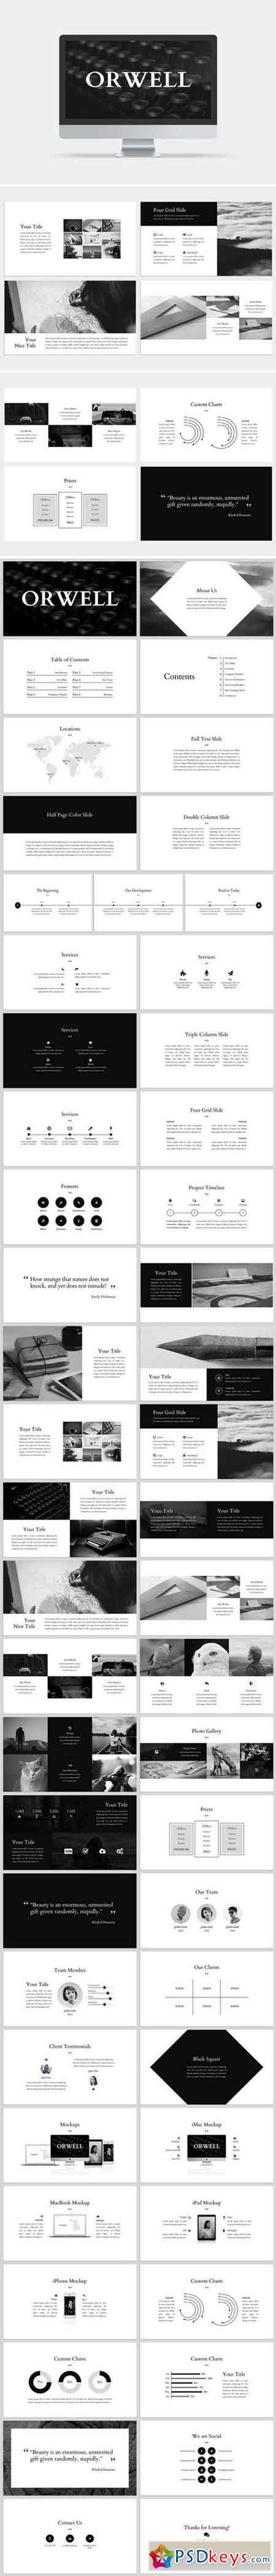 Orwell PowerPoint Template 752713